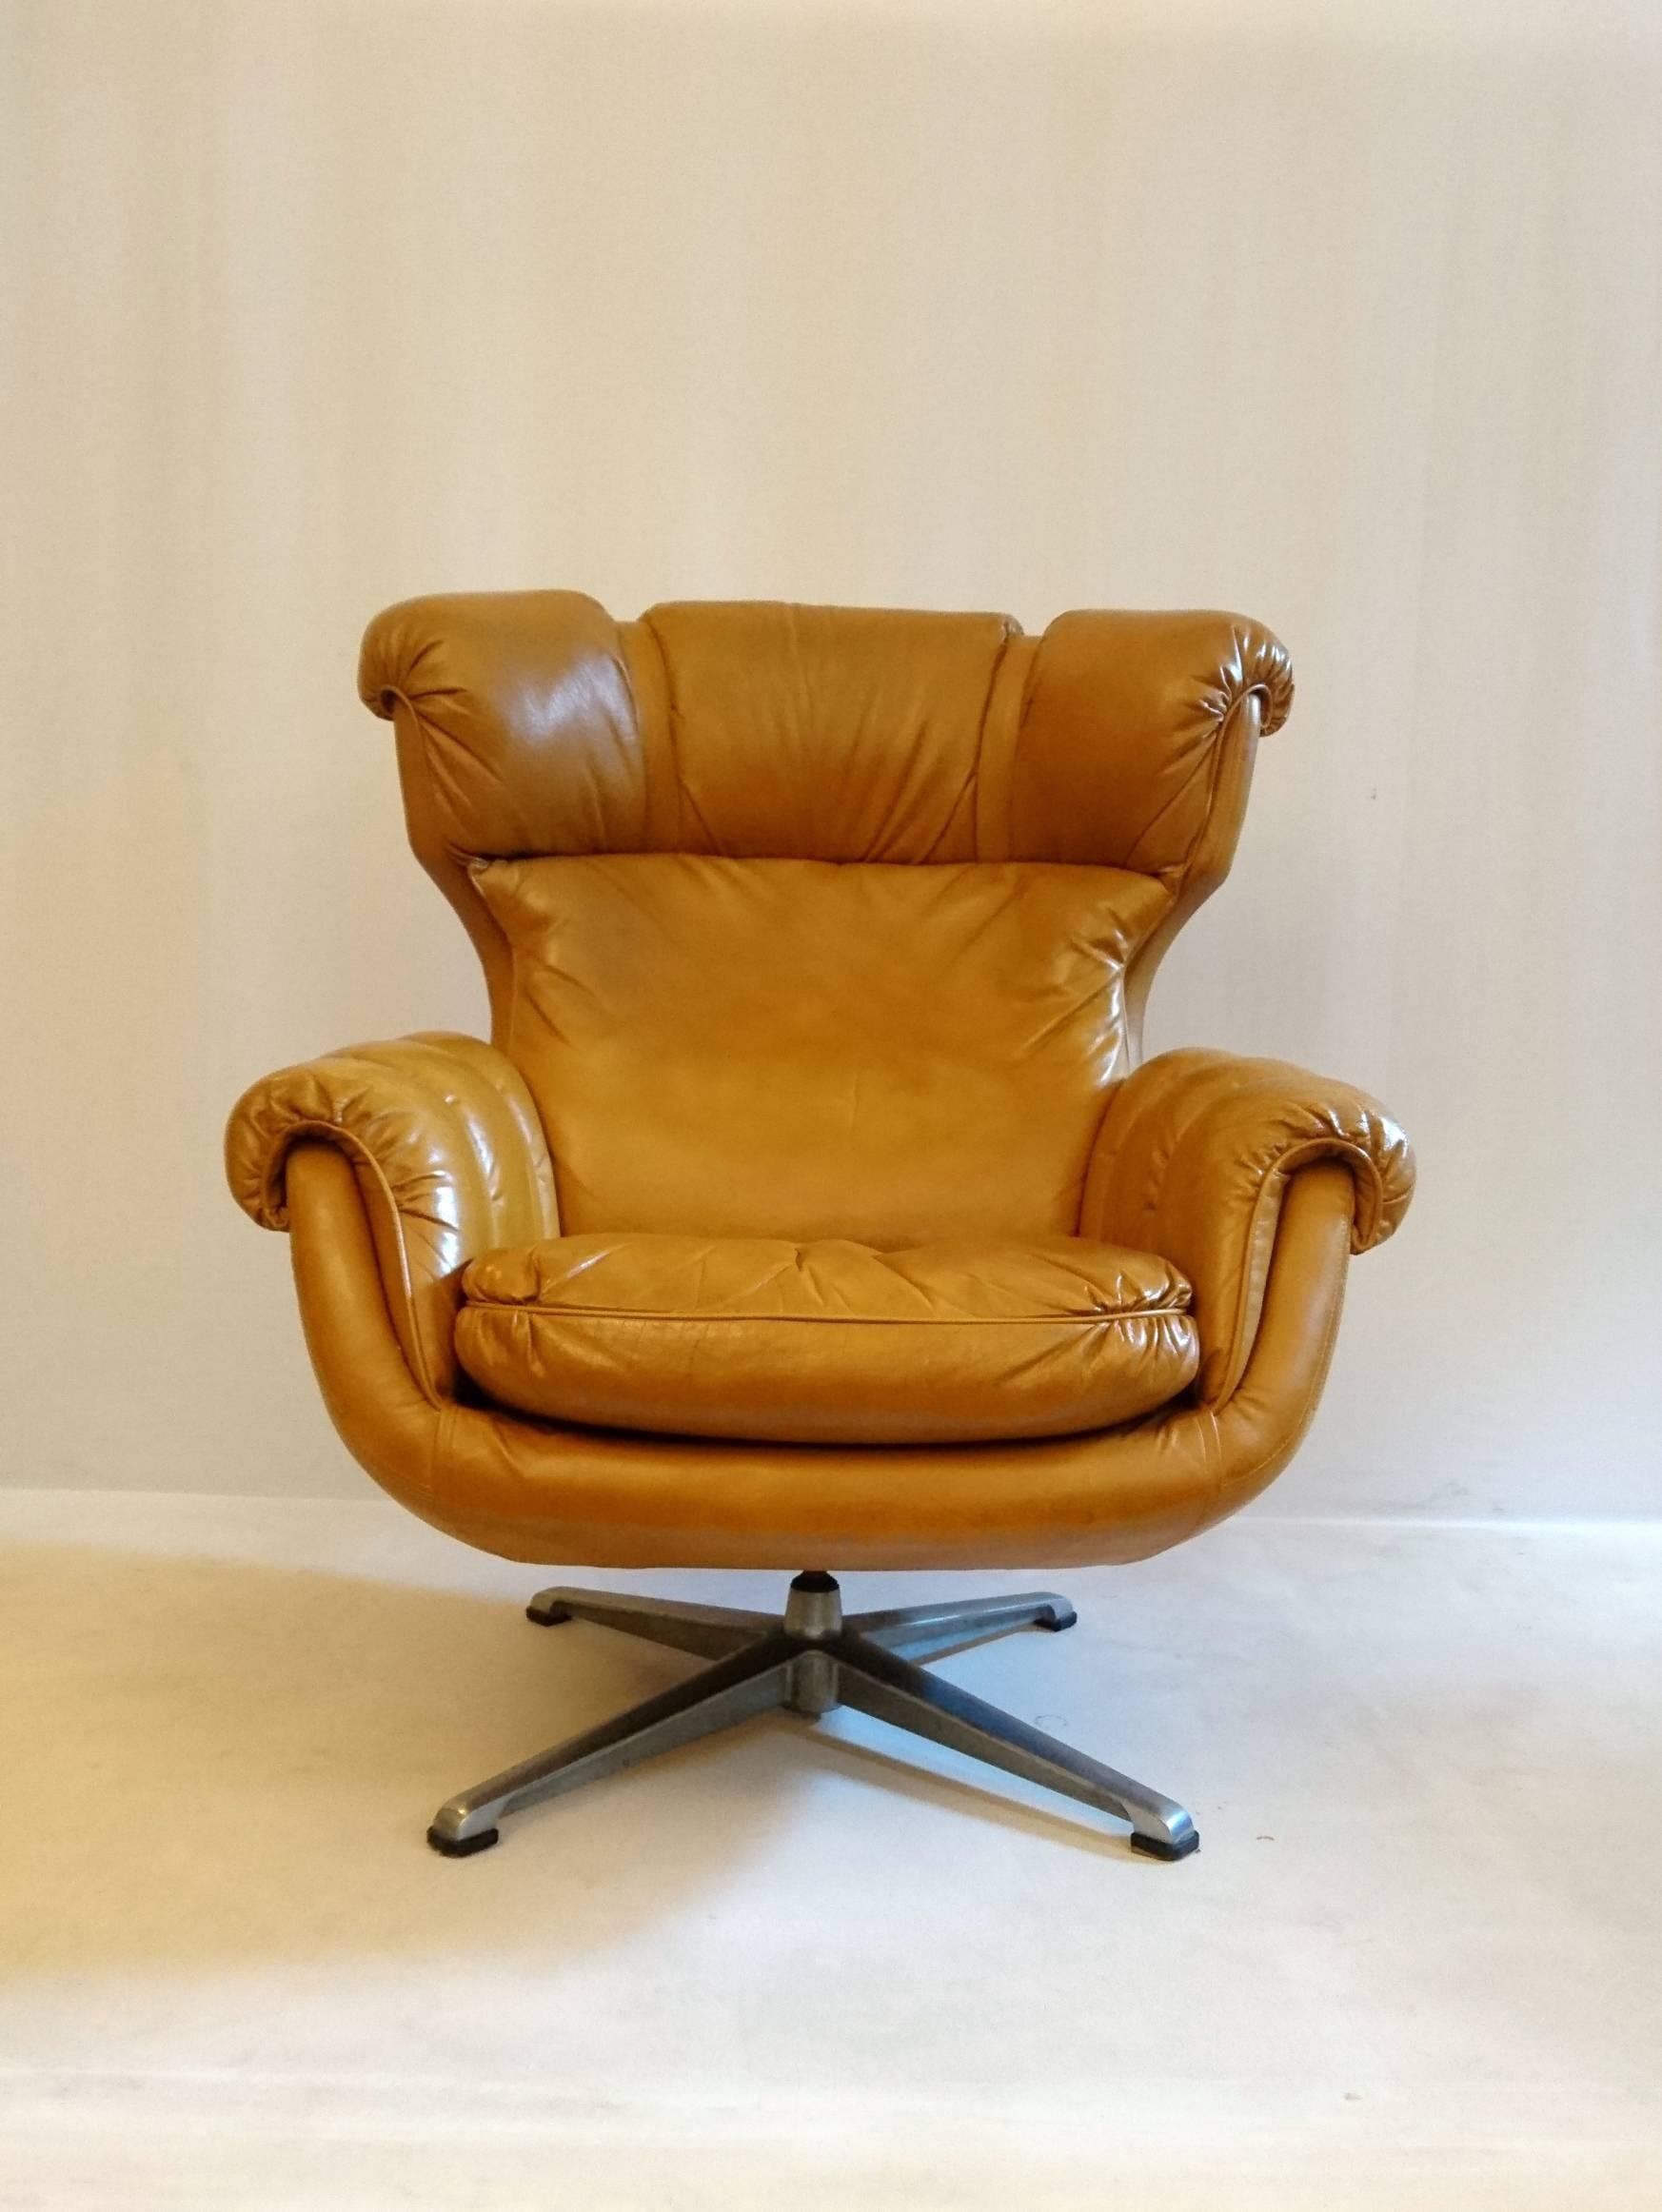 Super comfy and cool retro looking armchair from Italy in leather and with great shape. Detailing in form of belts with brass buckles.